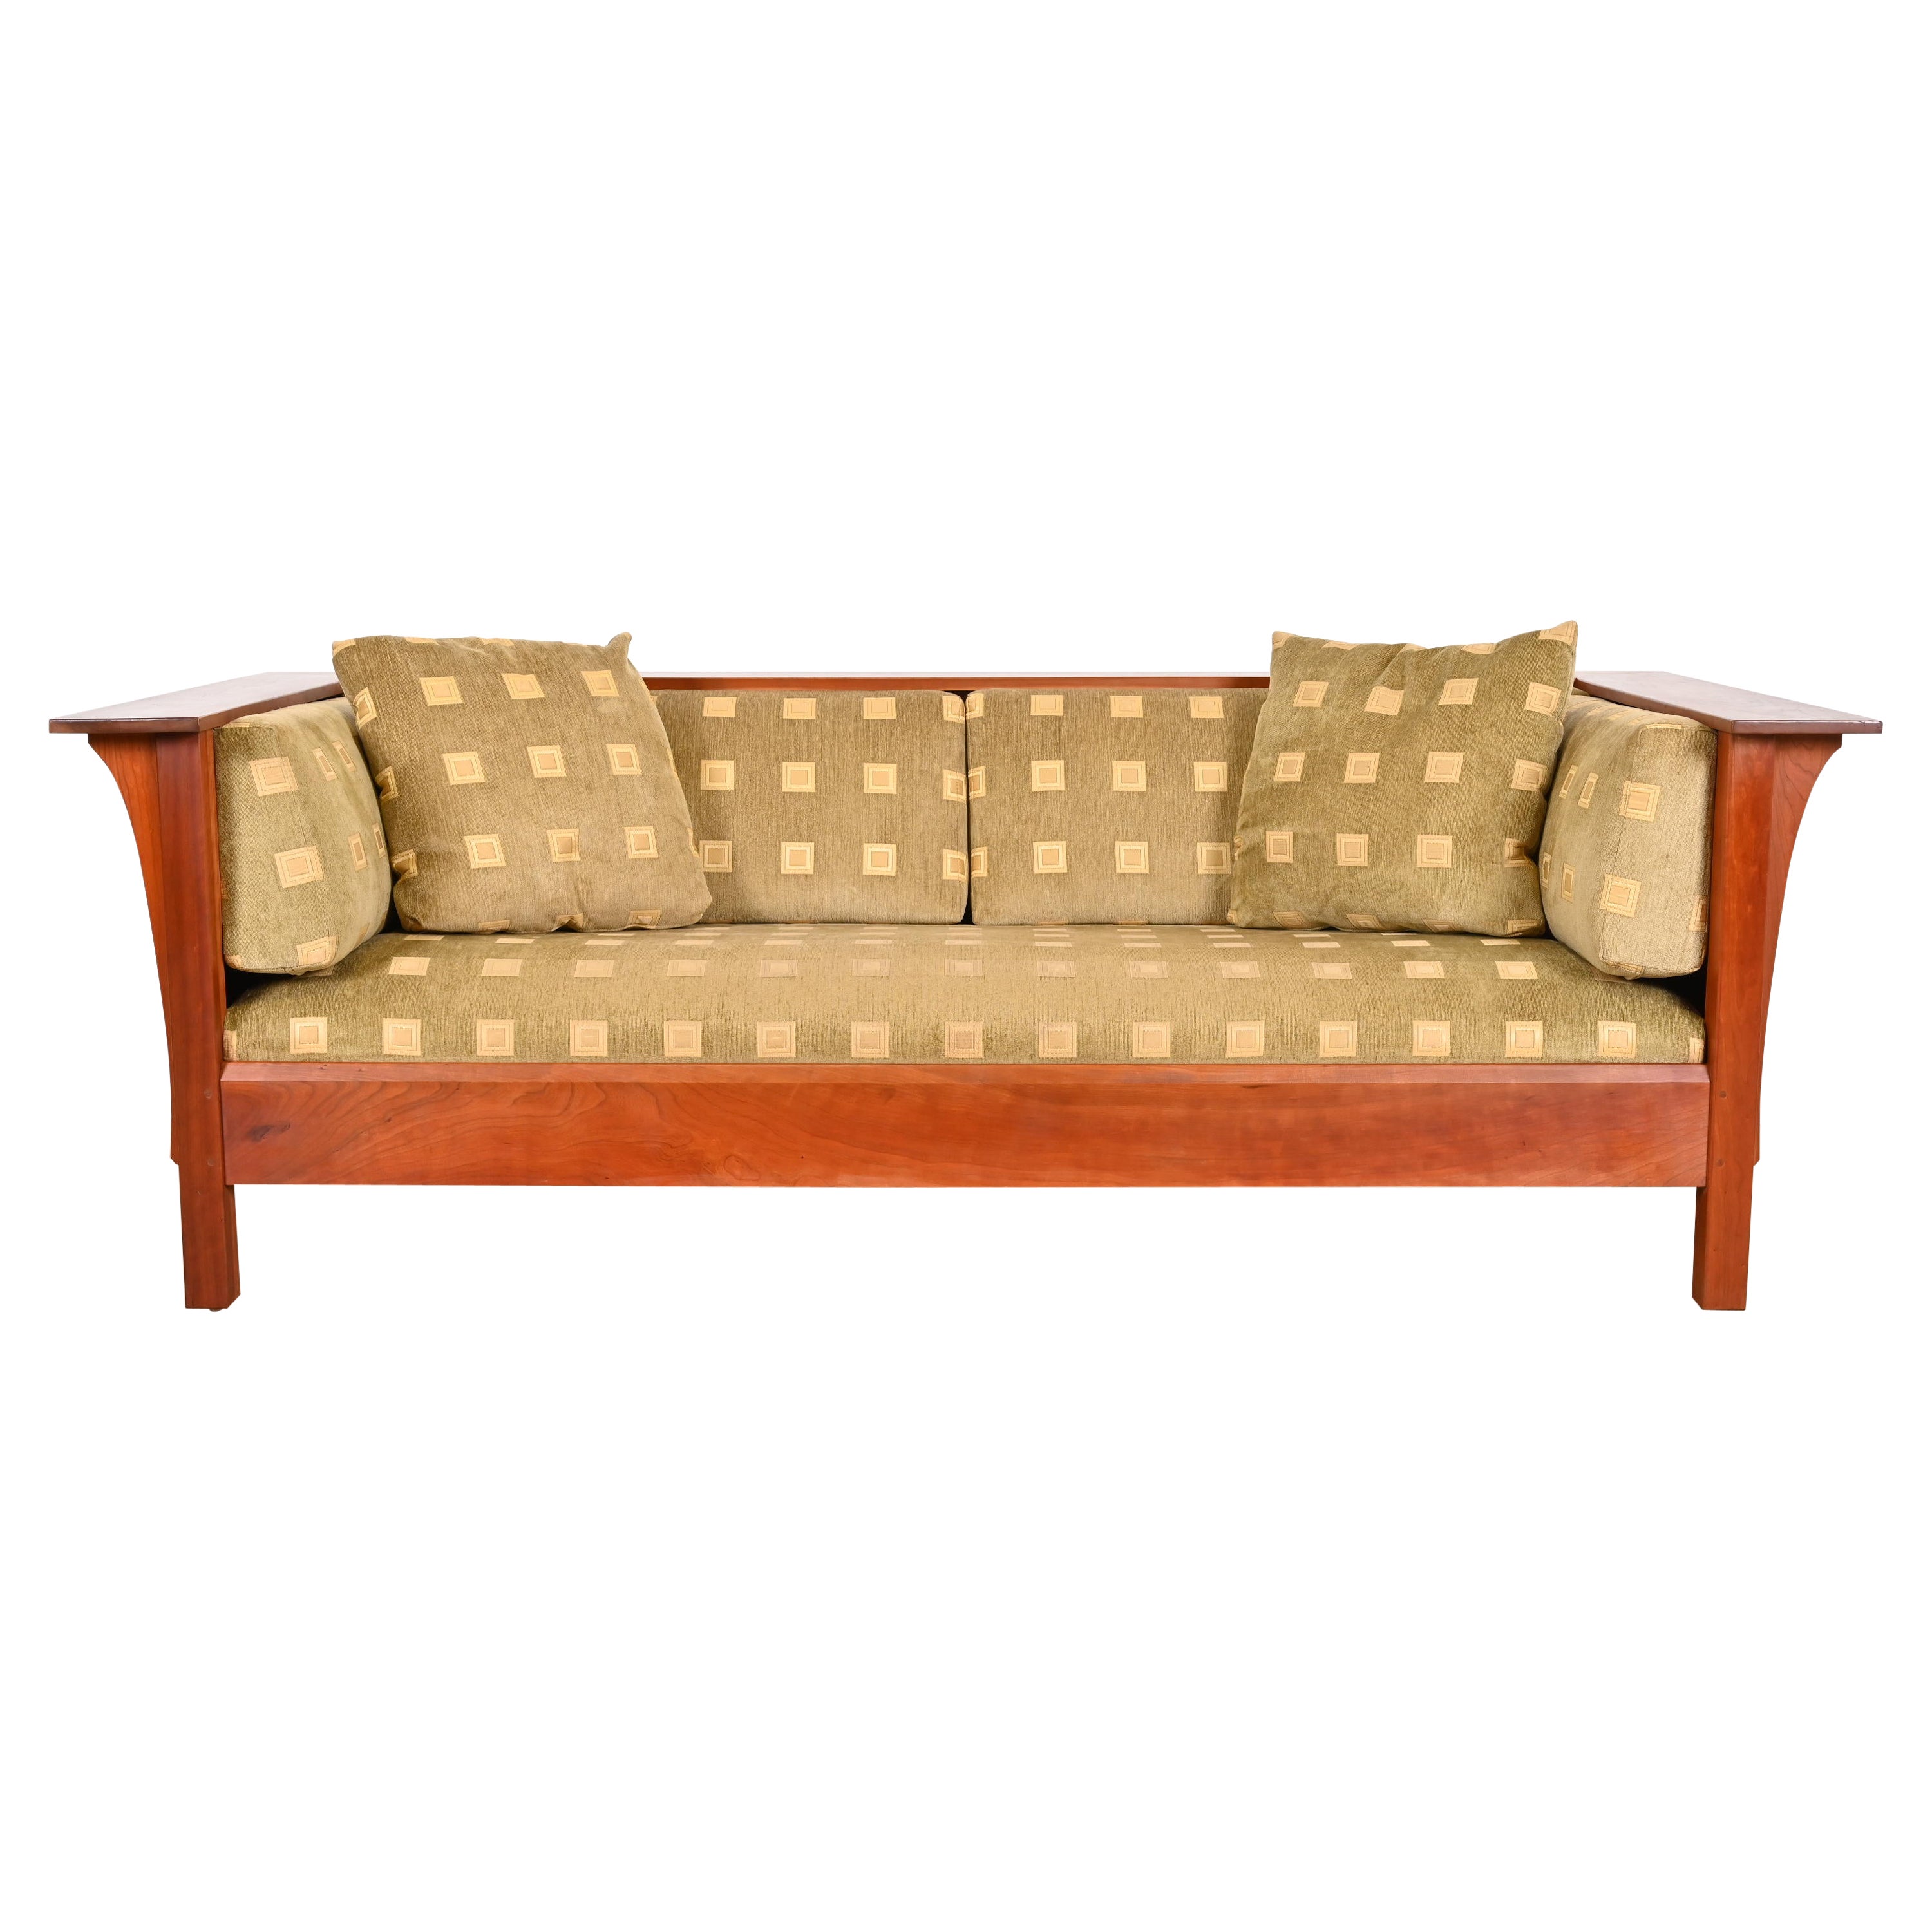 Stickley Mission Arts and Crafts Kirschbaumholz-Sofa